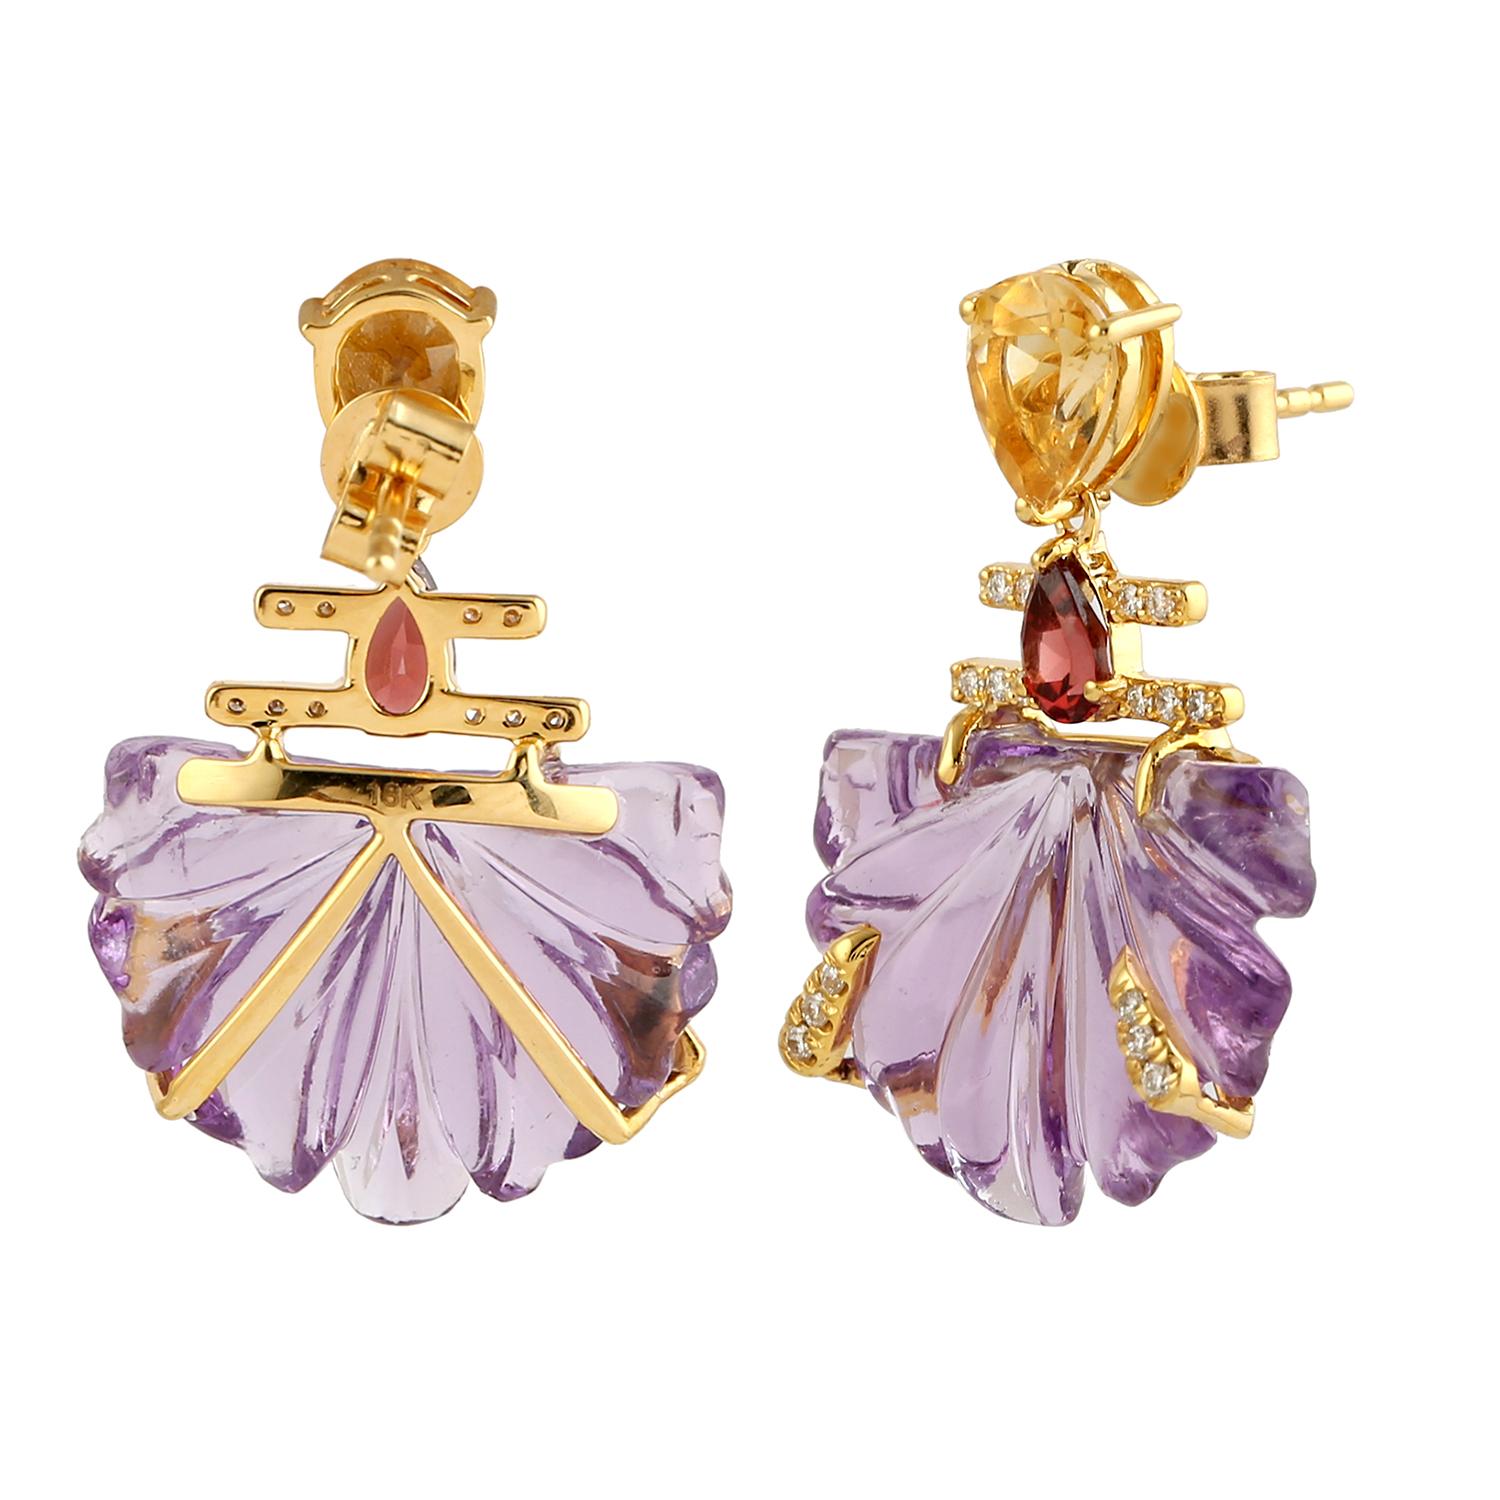 Cast in 14-karat gold. These beautiful earrings are set with carved multi gemstone, amethyst, citrine, rhodolite and .16 carats of sparkling diamonds. 

FOLLOW  MEGHNA JEWELS storefront to view the latest collection & exclusive pieces.  Meghna